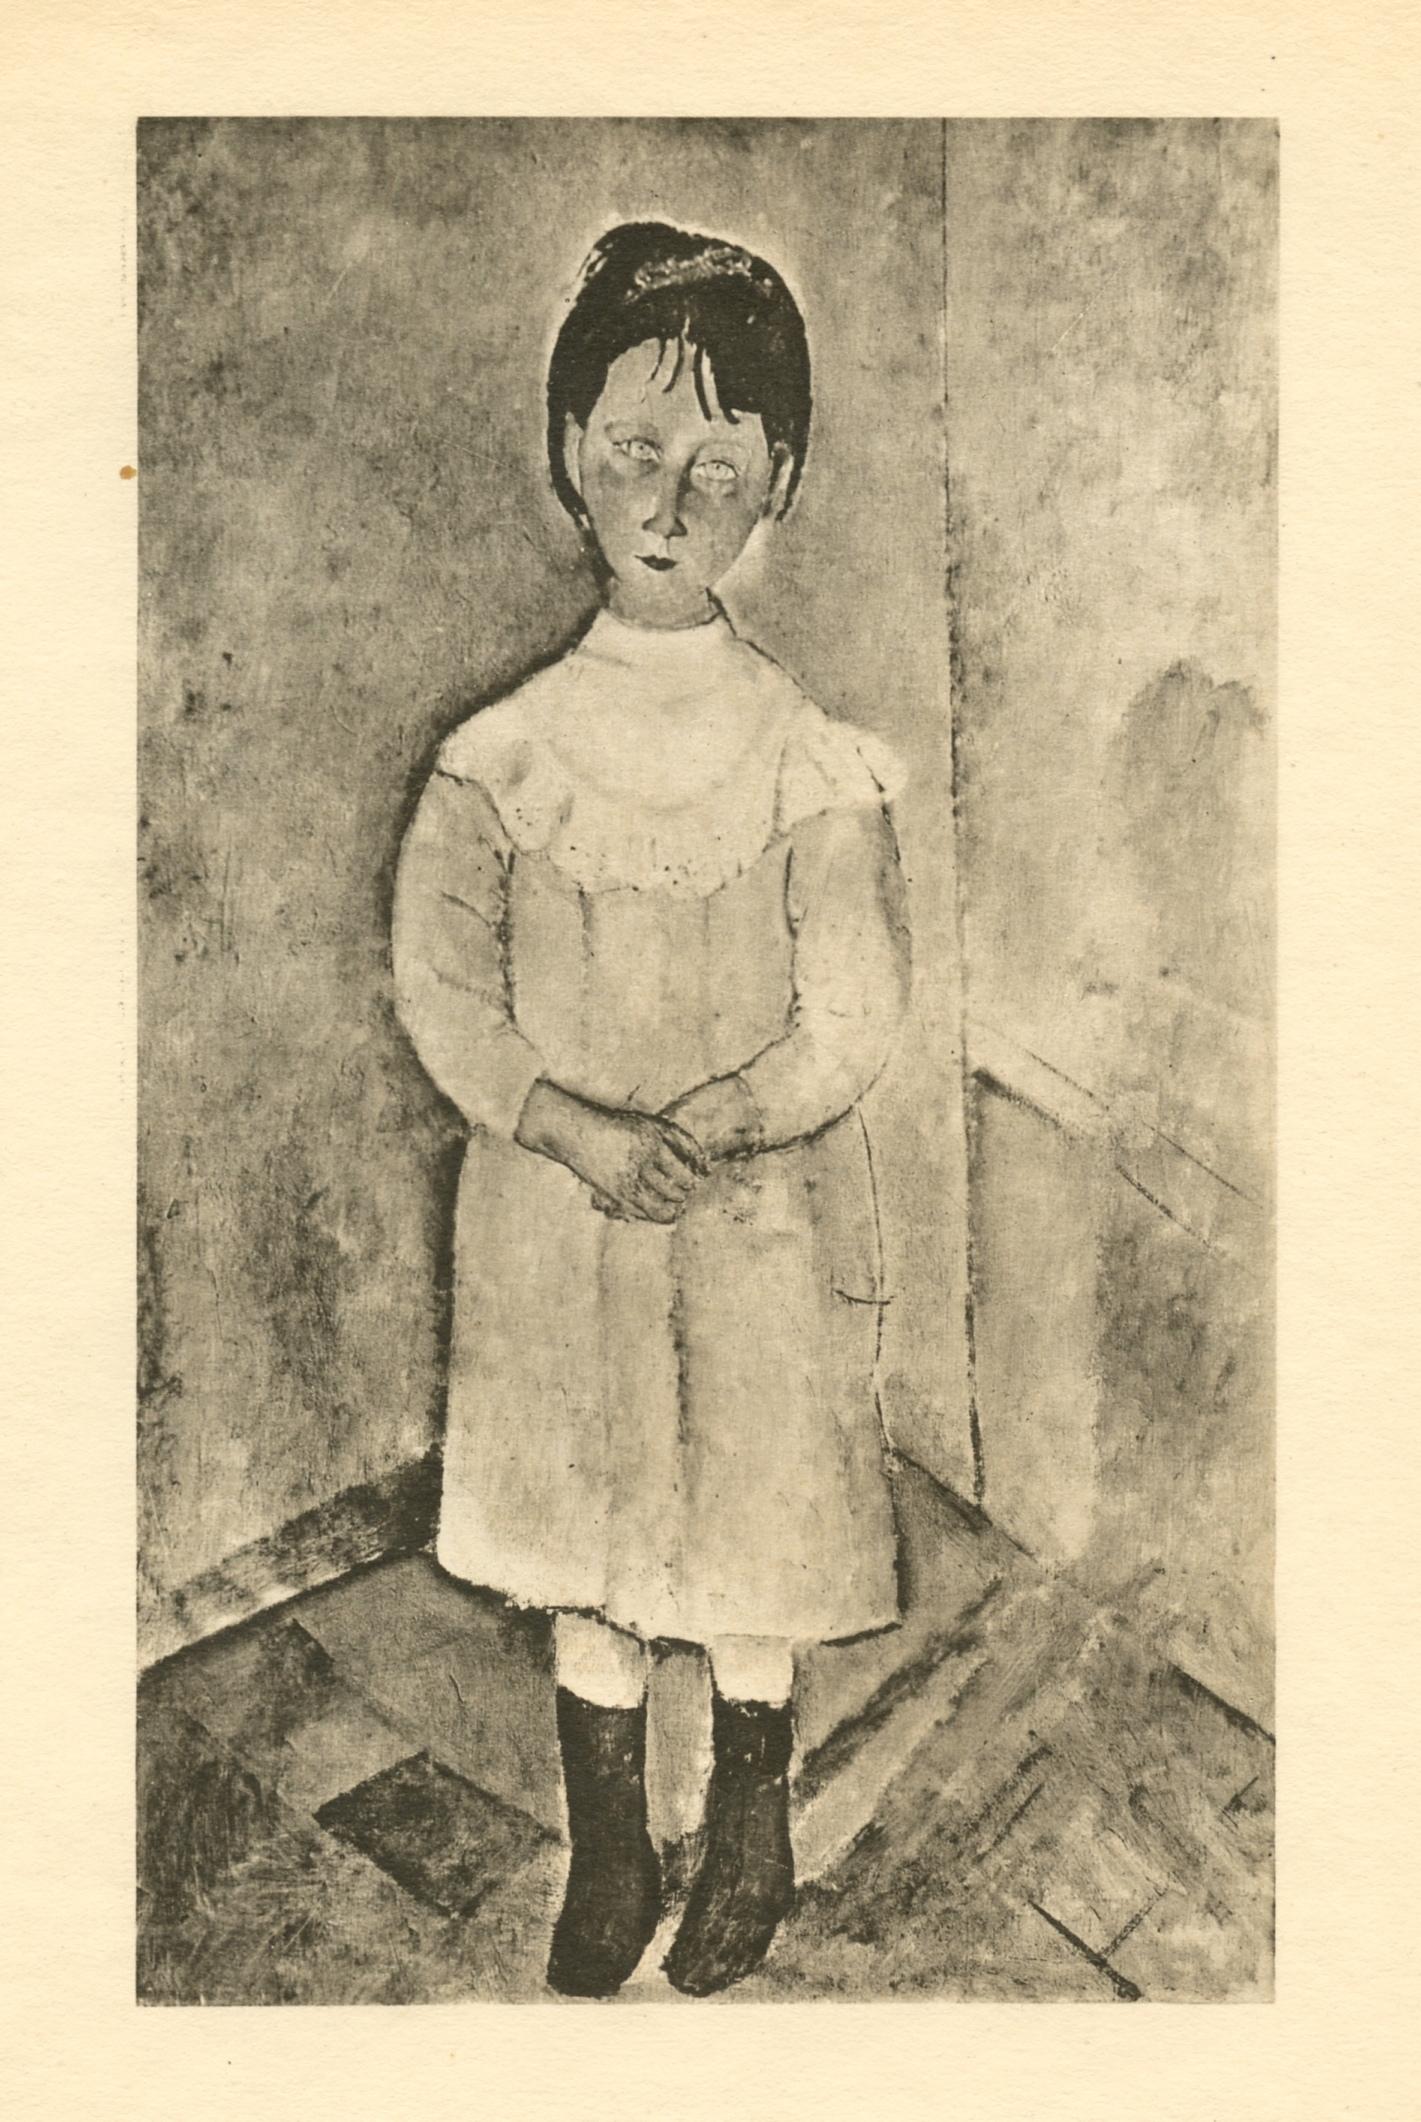 Medium: collotype (after the painting). Printed in 1926 at the Leon Marotte atelier and published in an edition of 1000 by Editions des Quatre Chemins. Image size: 7 3/4 x 4 3/4 inches (198 x 121 mm). Sheet size: 11 x 8 1/4 inches (280 x 210 mm).